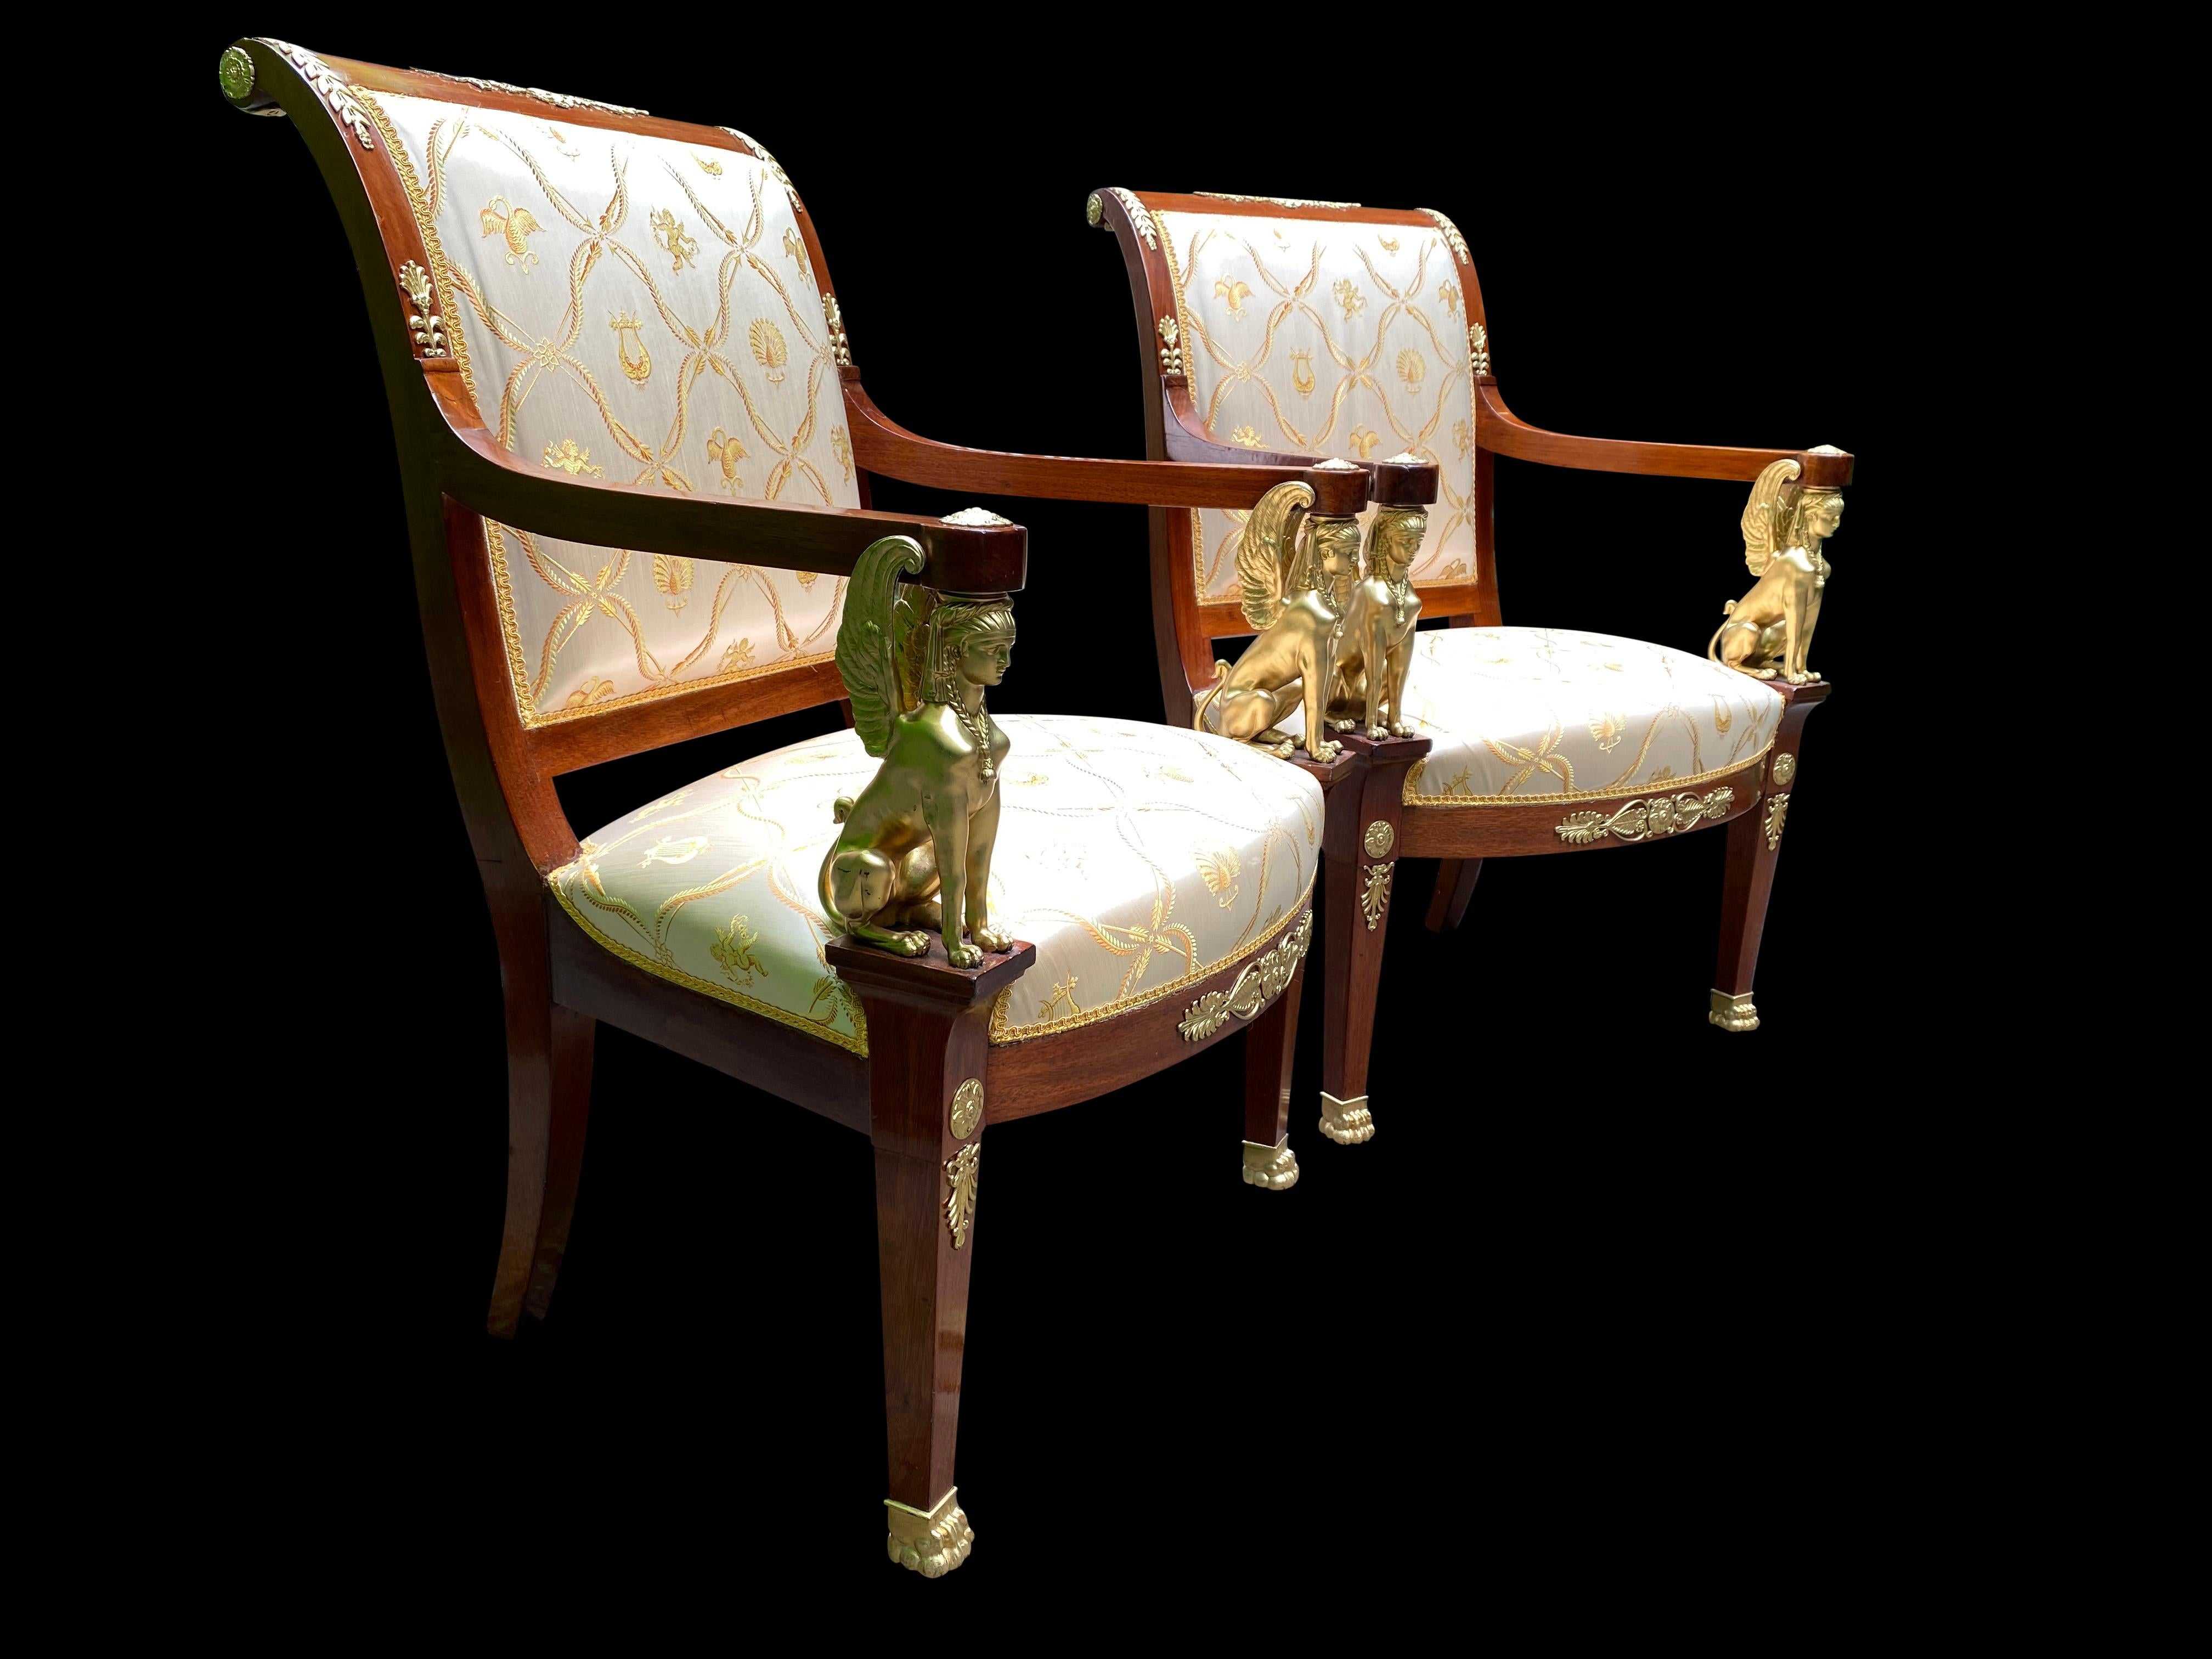 Hand-Carved French Empire Armchairs with Bronze Mounts, 19th Century For Sale